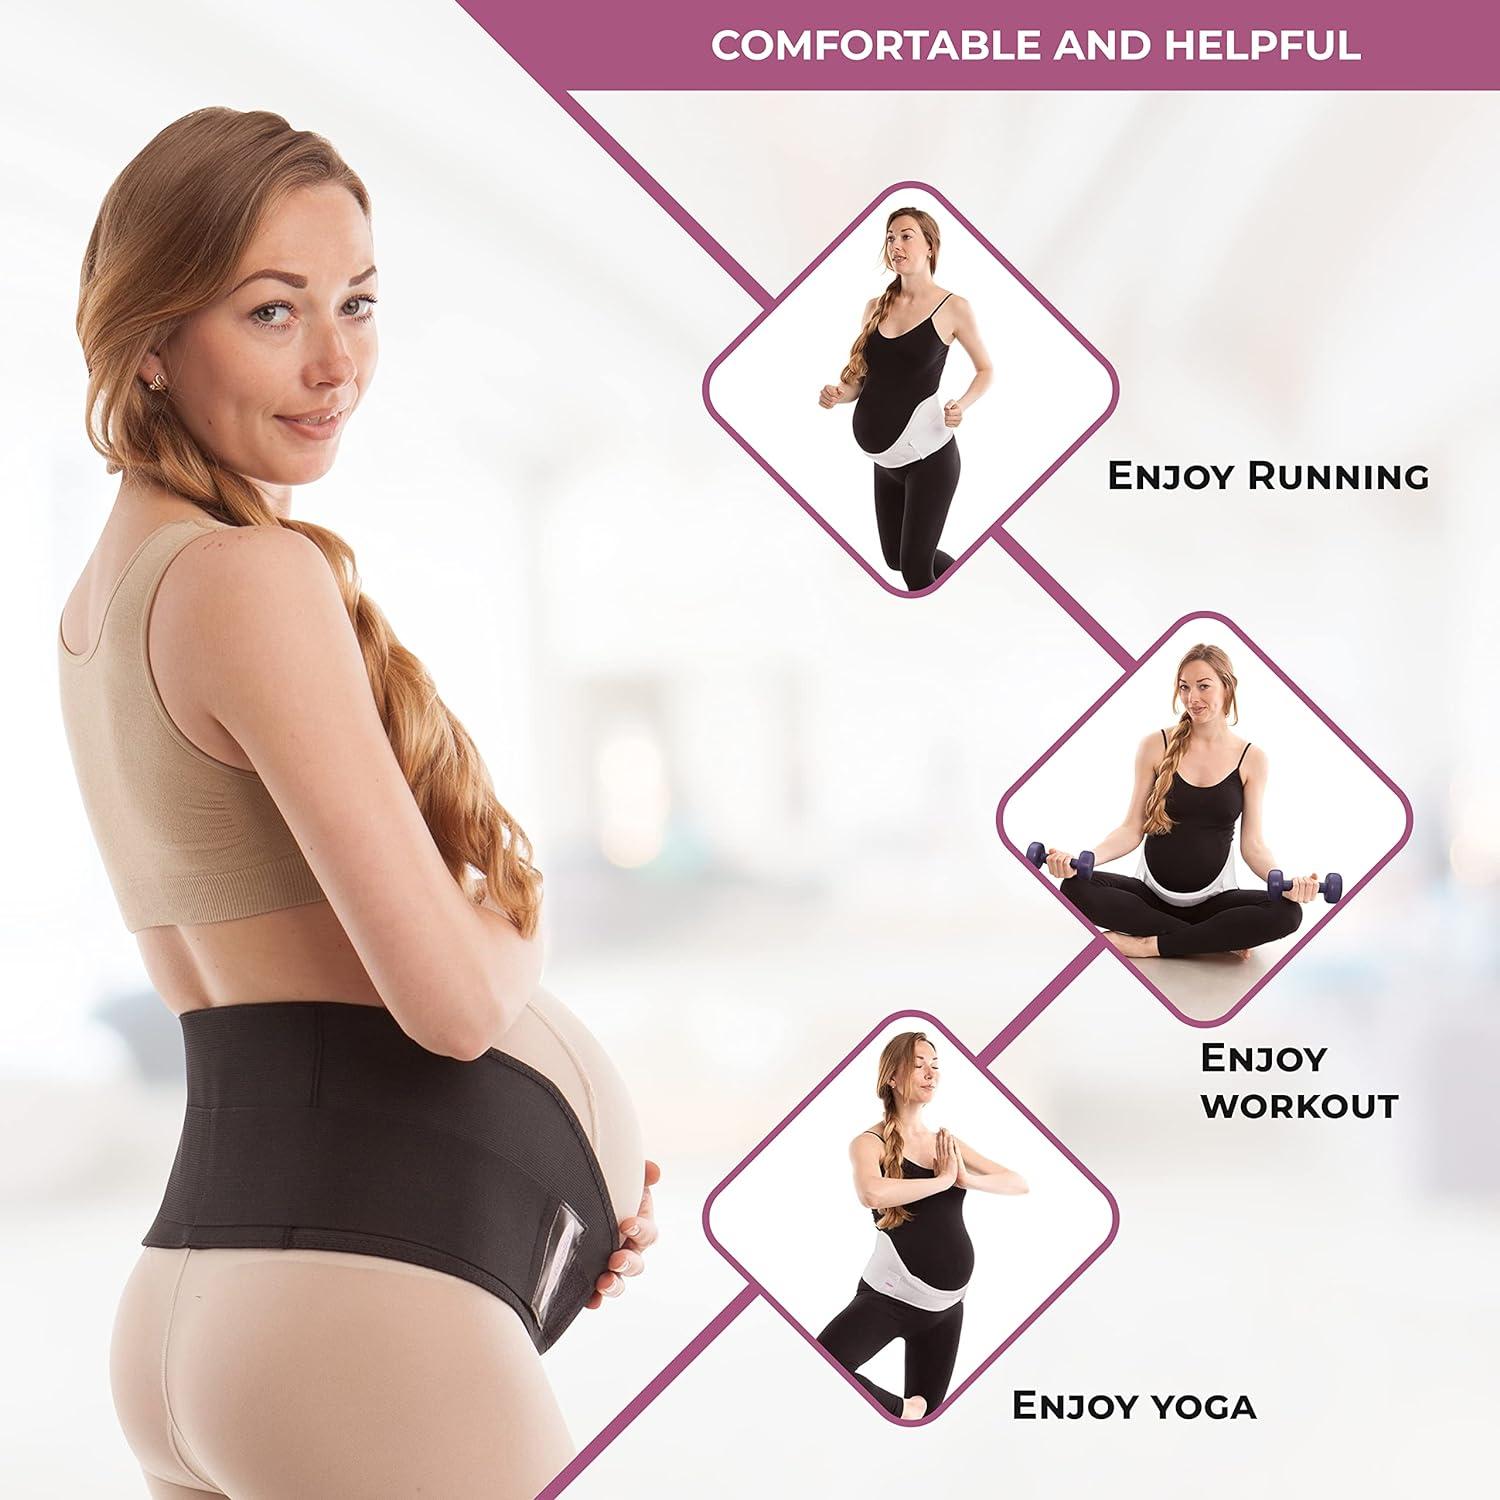 Pregnancy Belly Support Band - Pregnancy Belt – For Back Pain and Pelvic  Pressure During Pregnancy - Maternity Support Belt - Maternity Belt,  Black-XL 